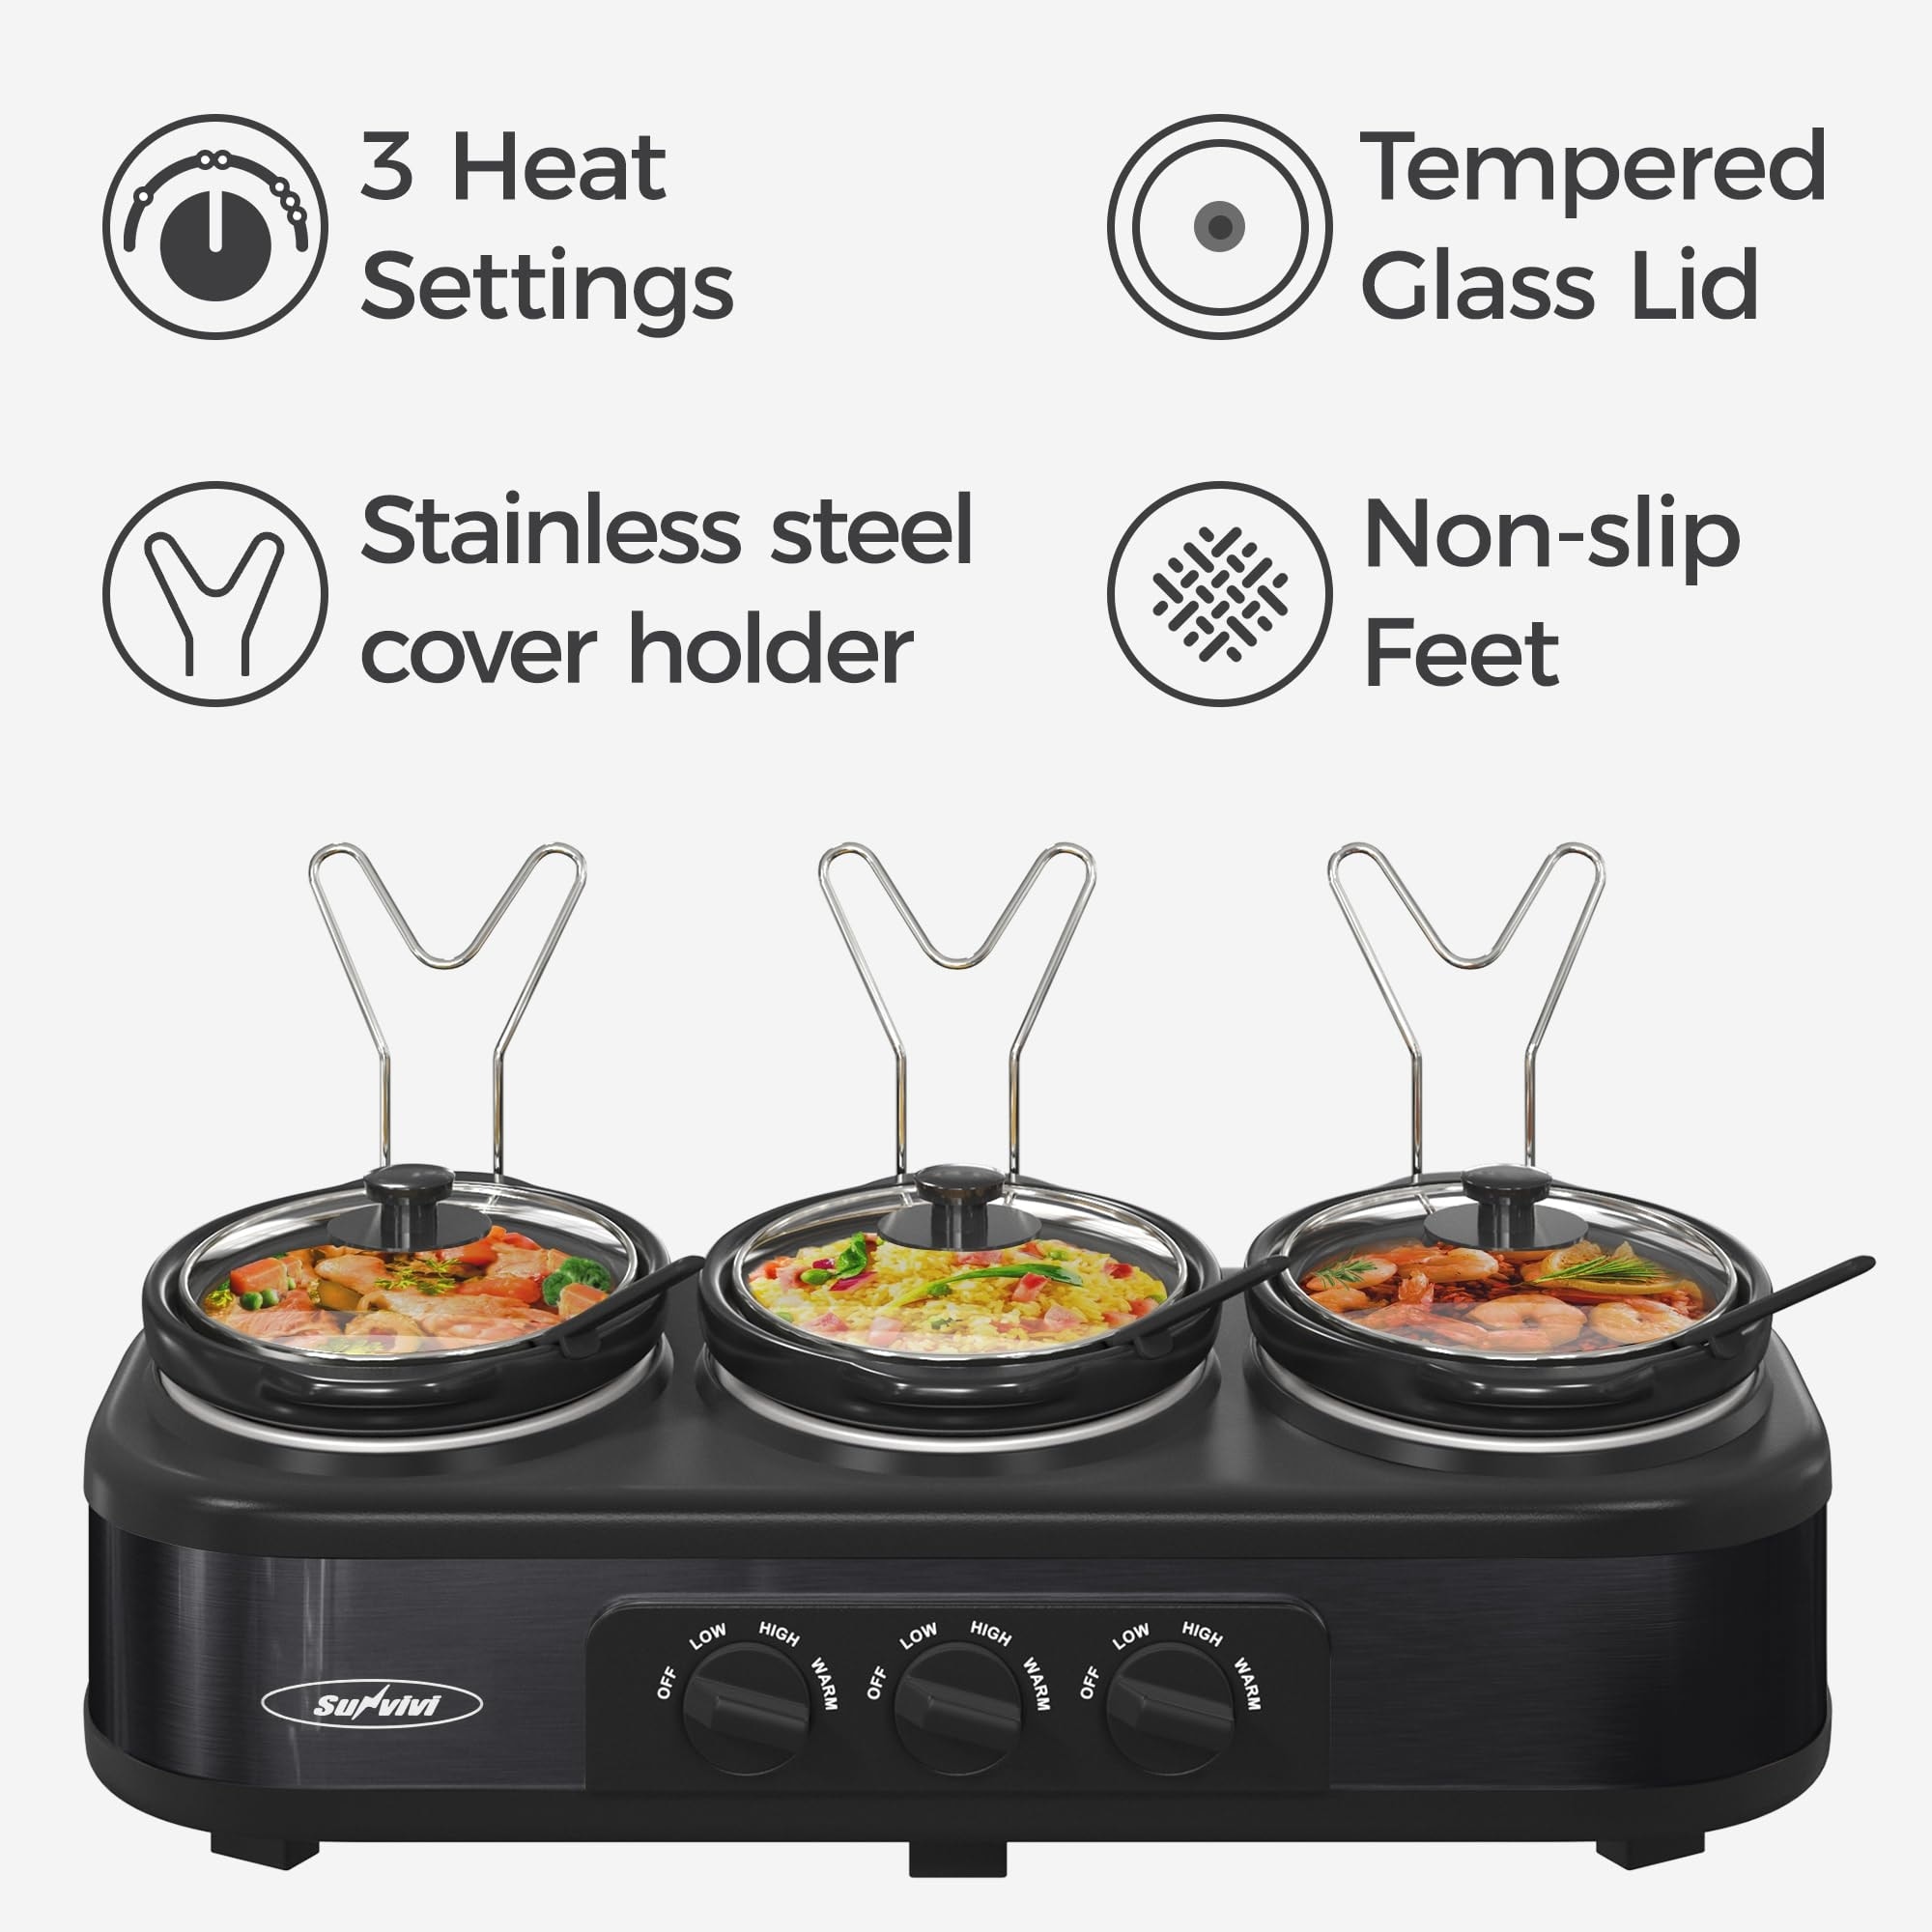 https://ak1.ostkcdn.com/images/products/is/images/direct/ced6970fa1958a26ef6a9a969c04a87f3cbe0bf5/Triple-Slow-Cooker-Buffet-Servers-and-Warmer%2C3-Pot-Food-Mini-Manual-Slow-Cooker-with-Adjustable-Temp%2C-Lid-Rests%2C-Ceramic-Pot.jpg